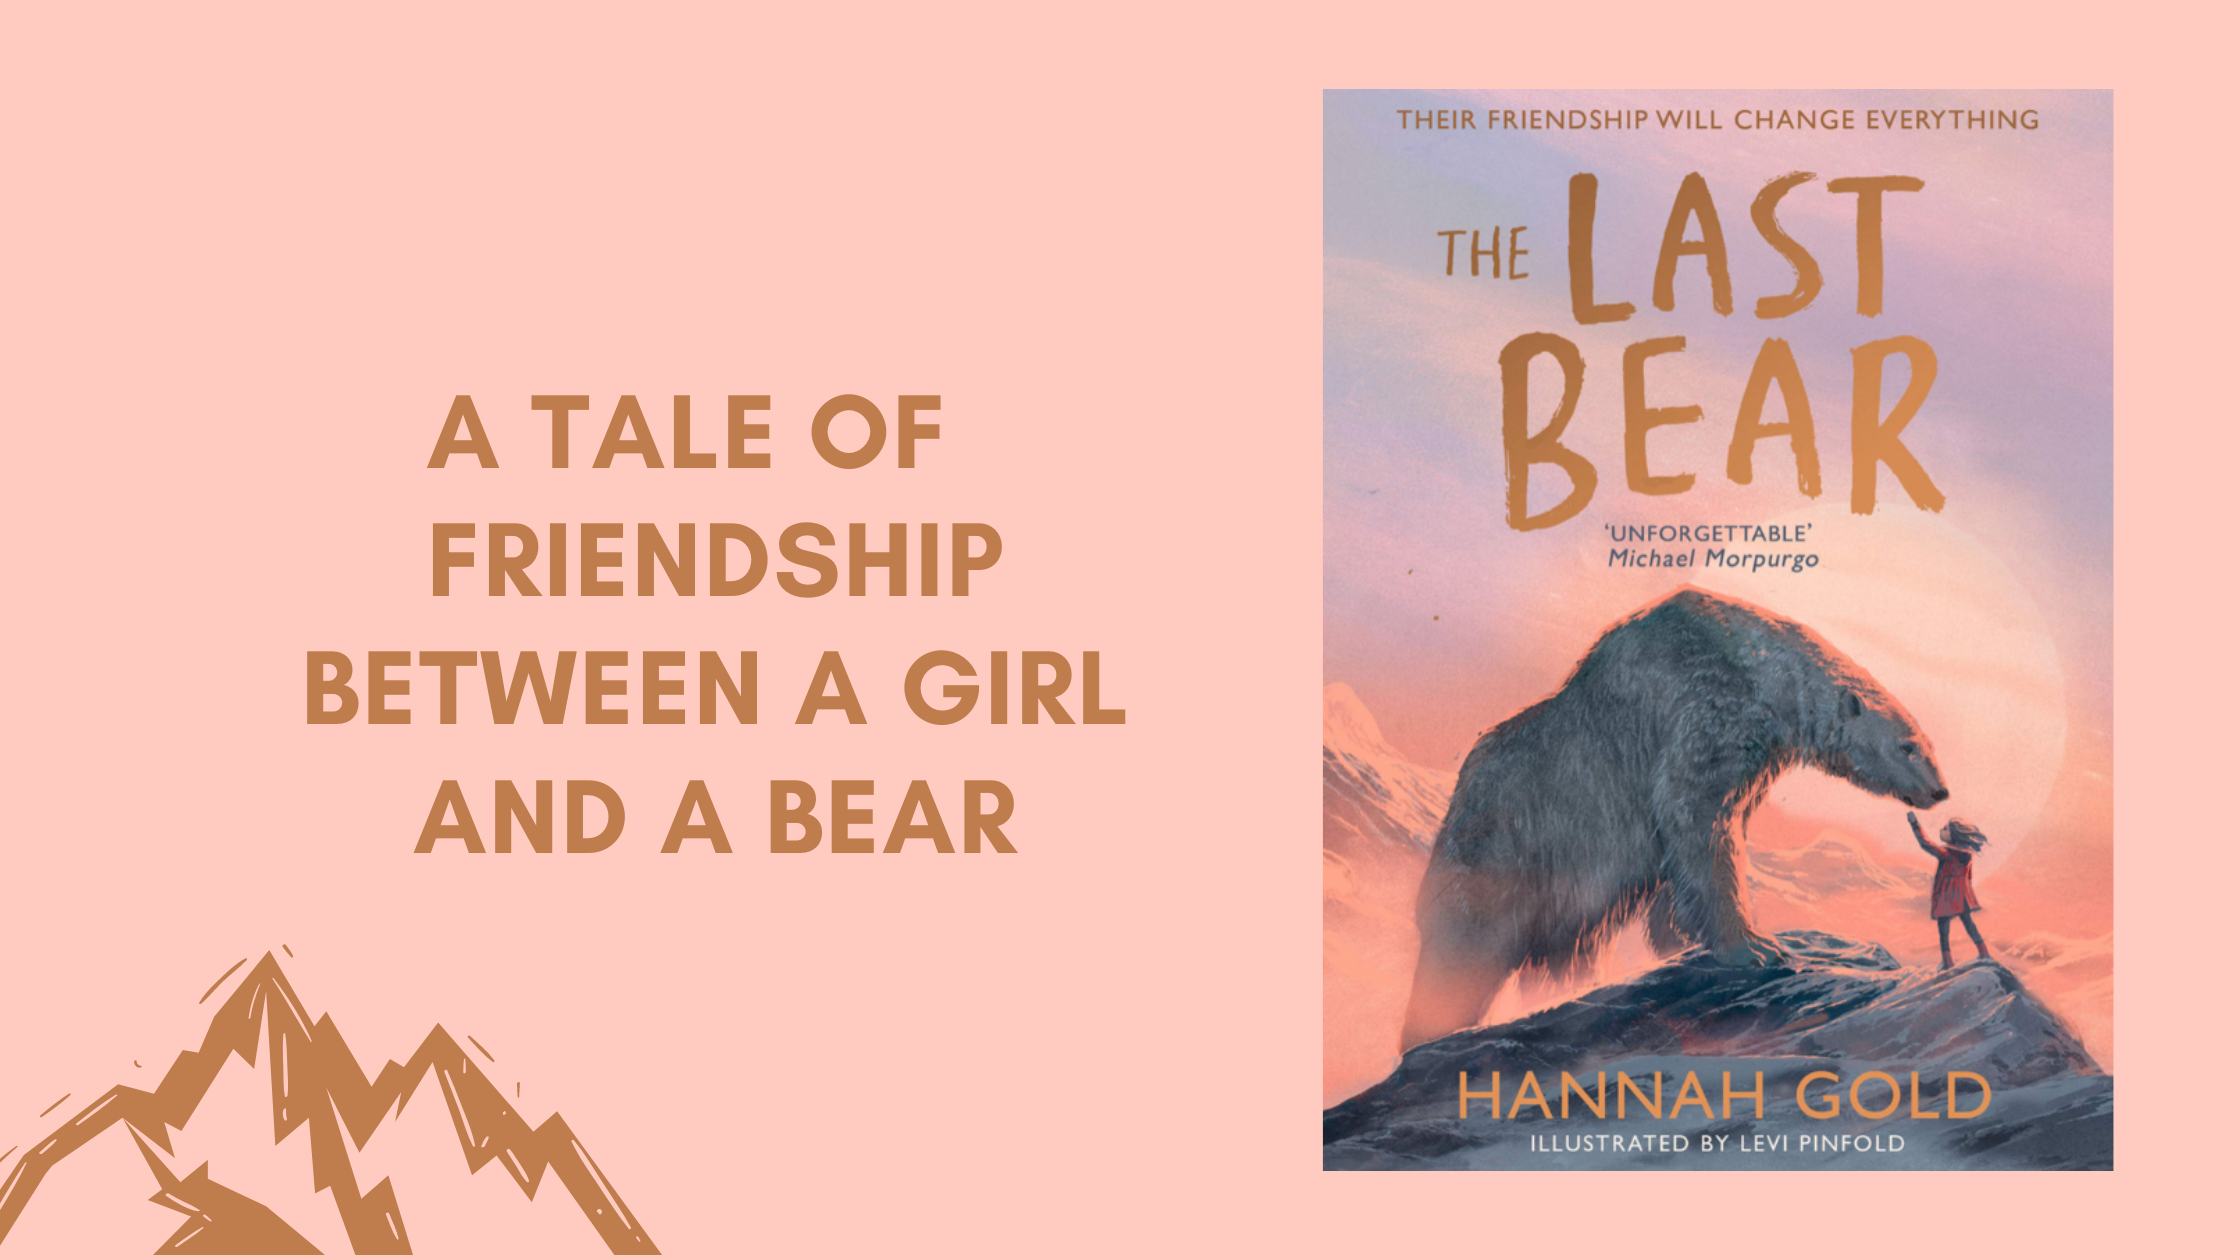 The Last Bear - Book Review